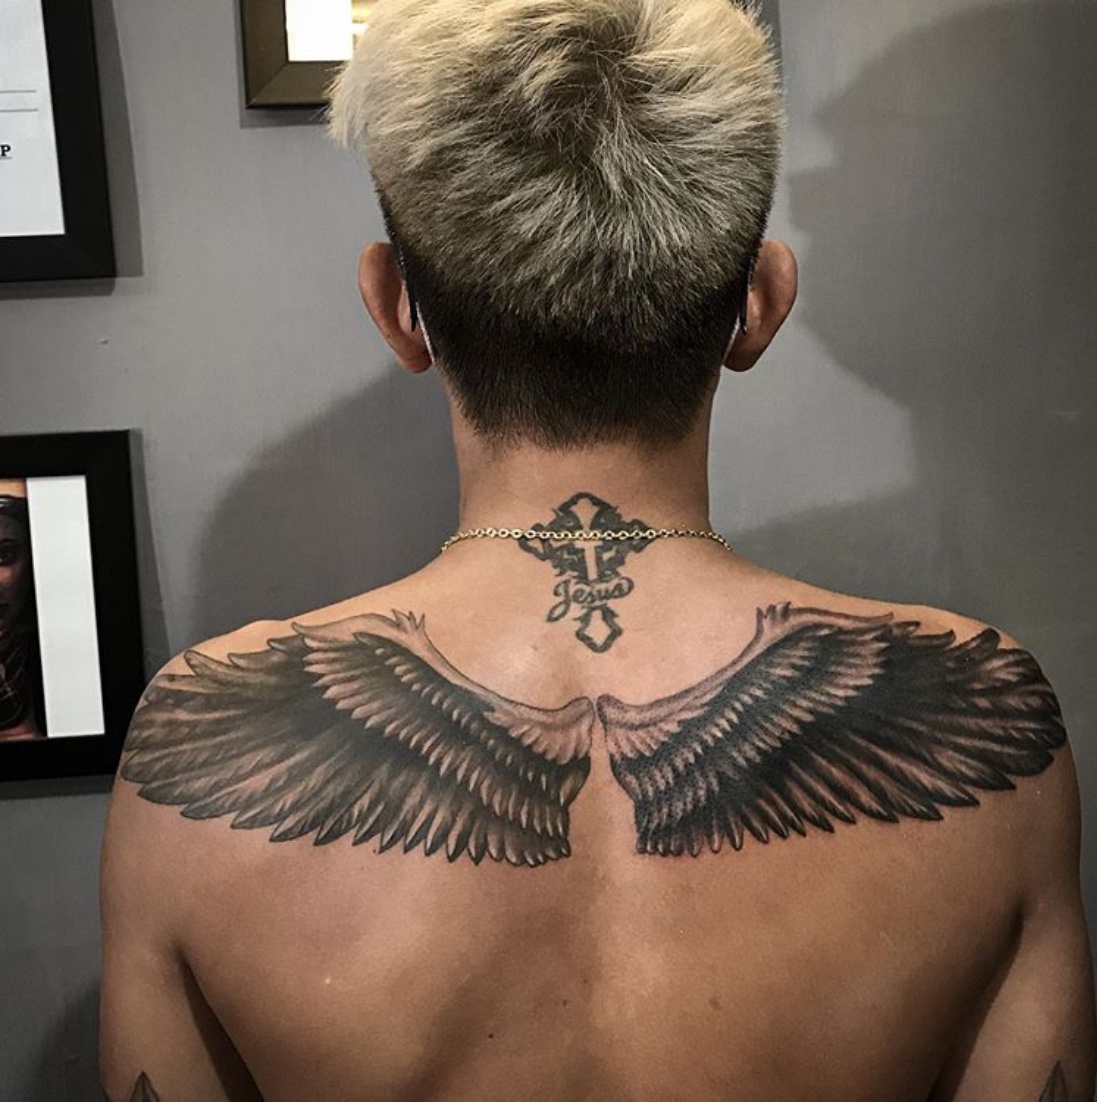 Getting a wings tattoo is a beautiful... - N.A Tattoo Studio | Facebook-cheohanoi.vn